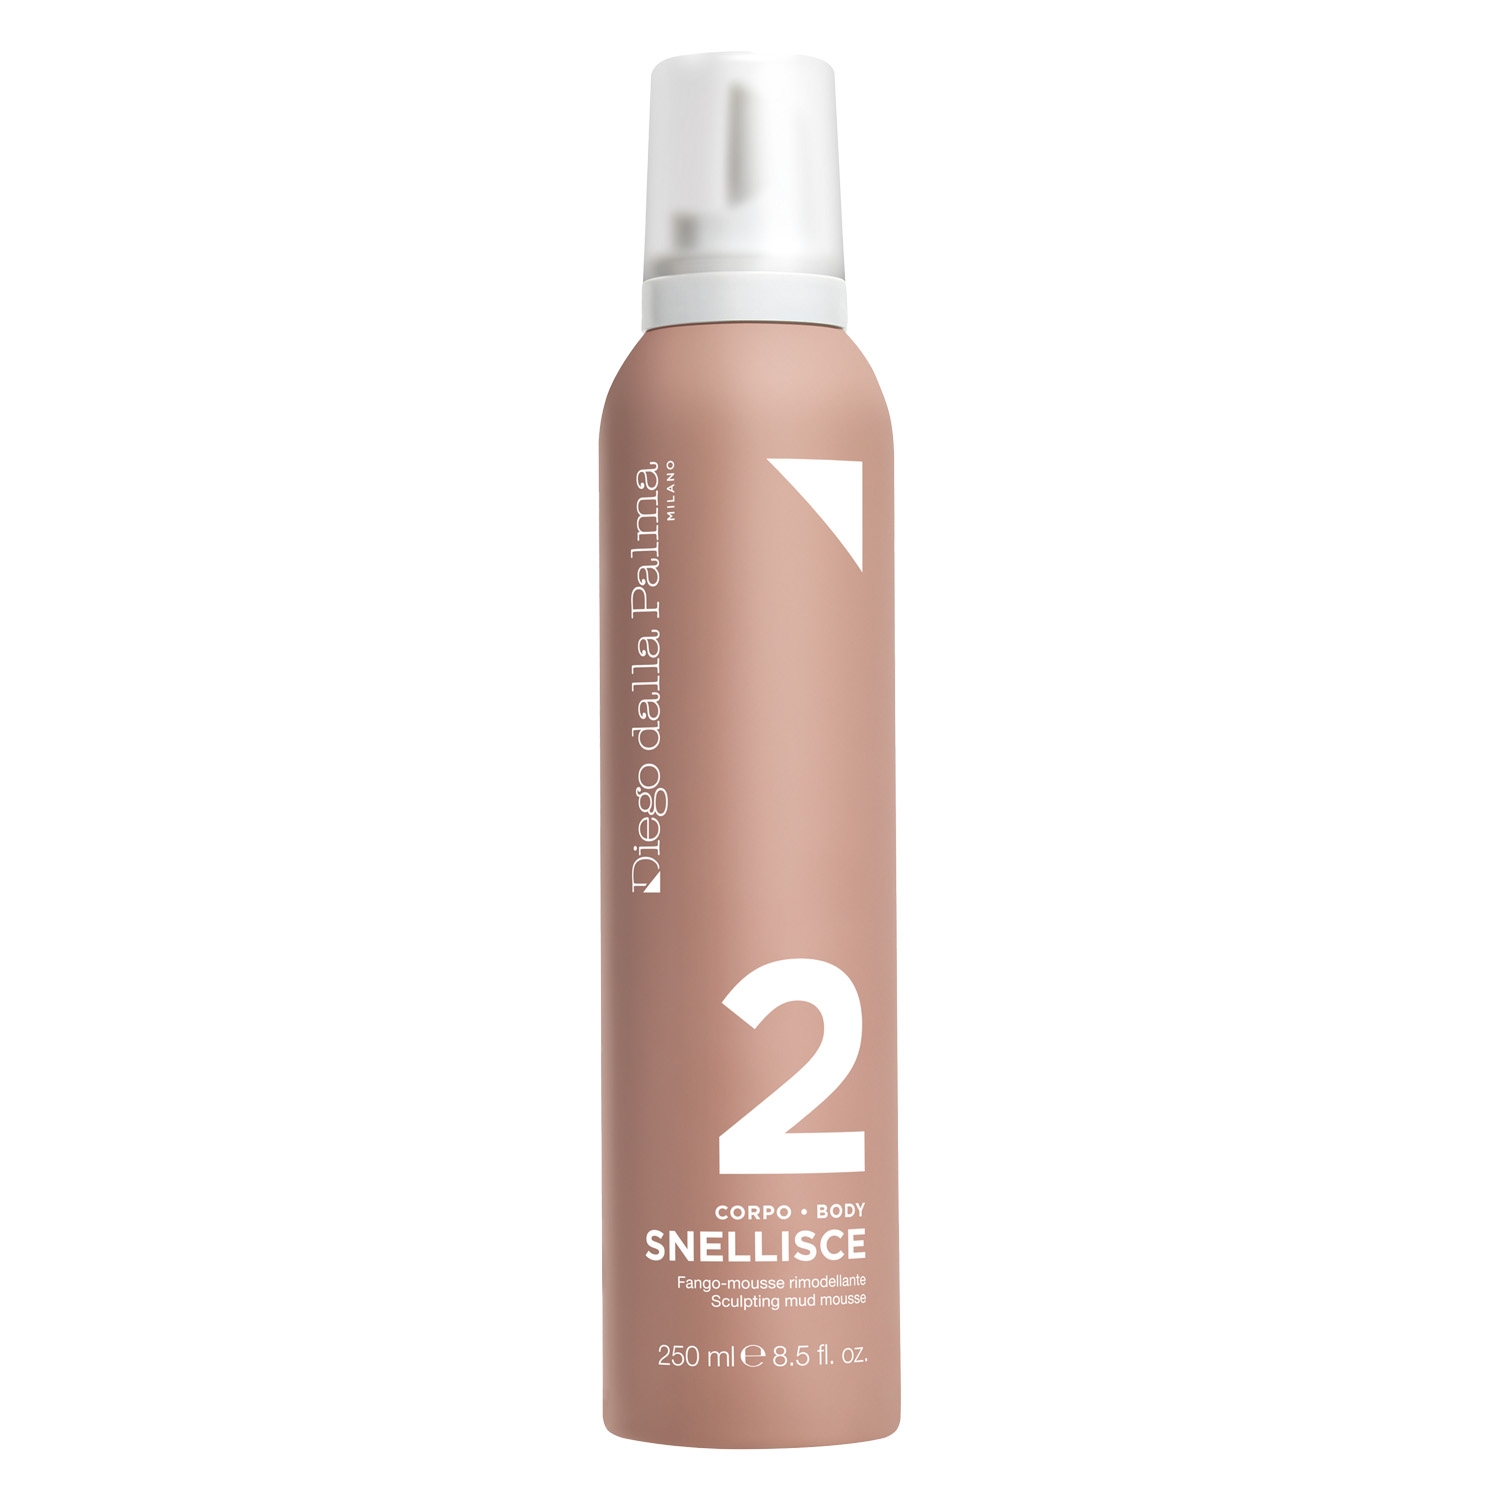 Product image from Diego dalla Palma - 2. SNELLISCE Sculpting mud mousse